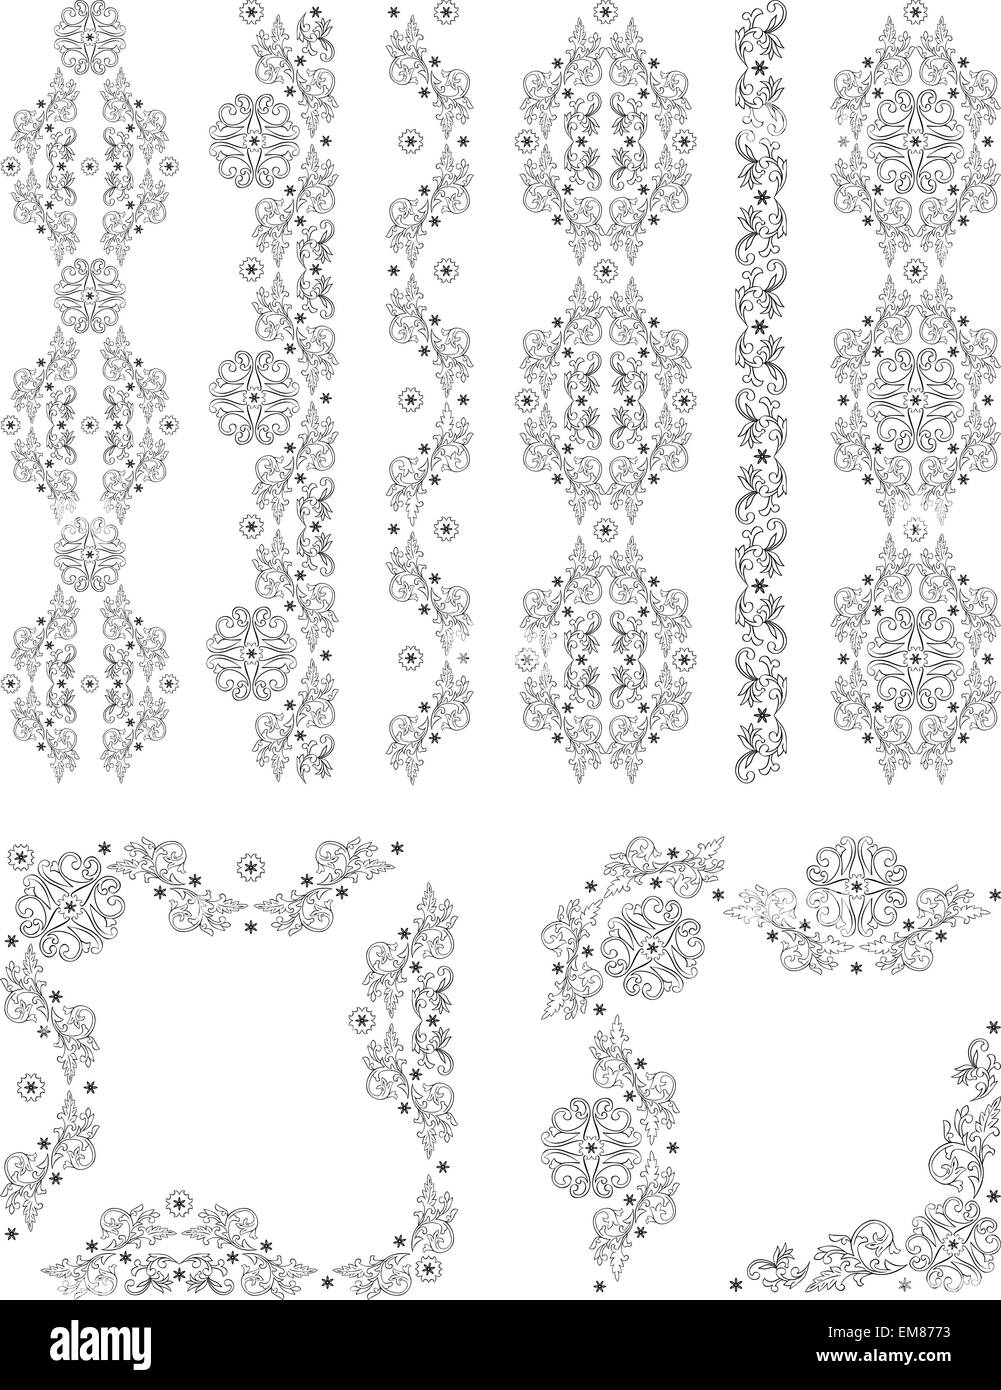 Set of vector borders, decorative floral elements for design. Pa Stock Vector